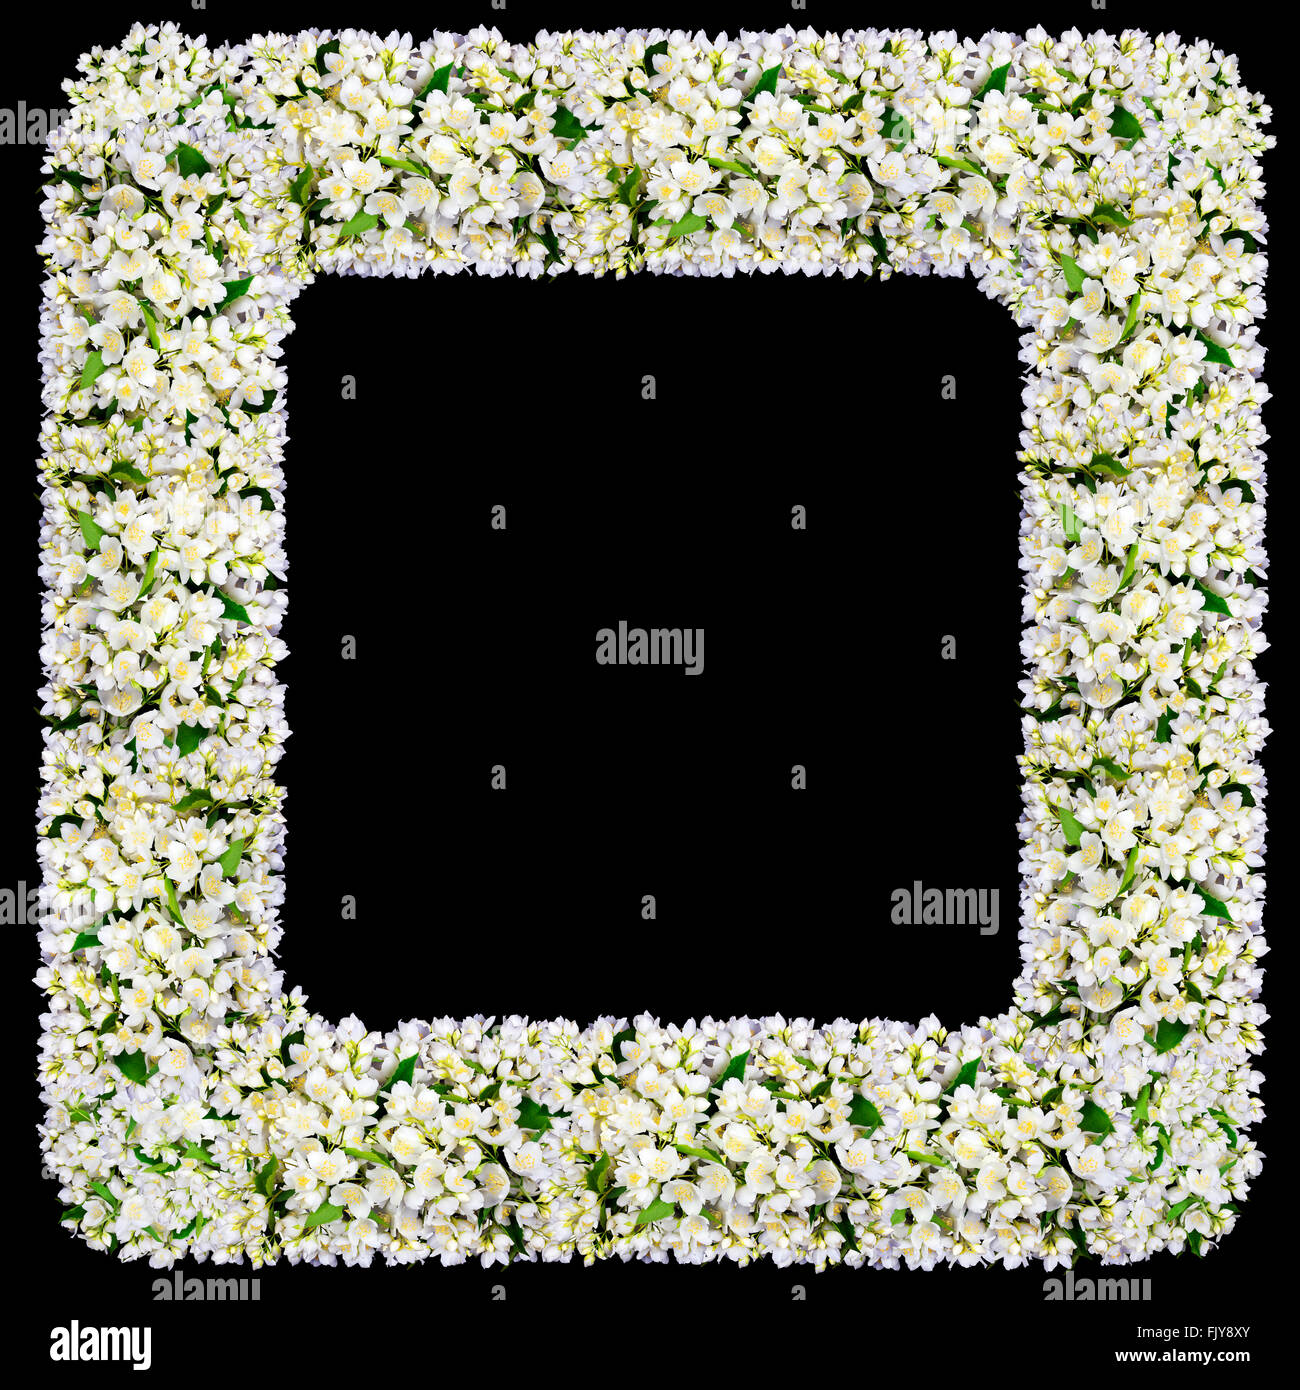 The mourning cemeterial  square frame  from white  jasmine flowers. Isolated on black abstract collage Stock Photo